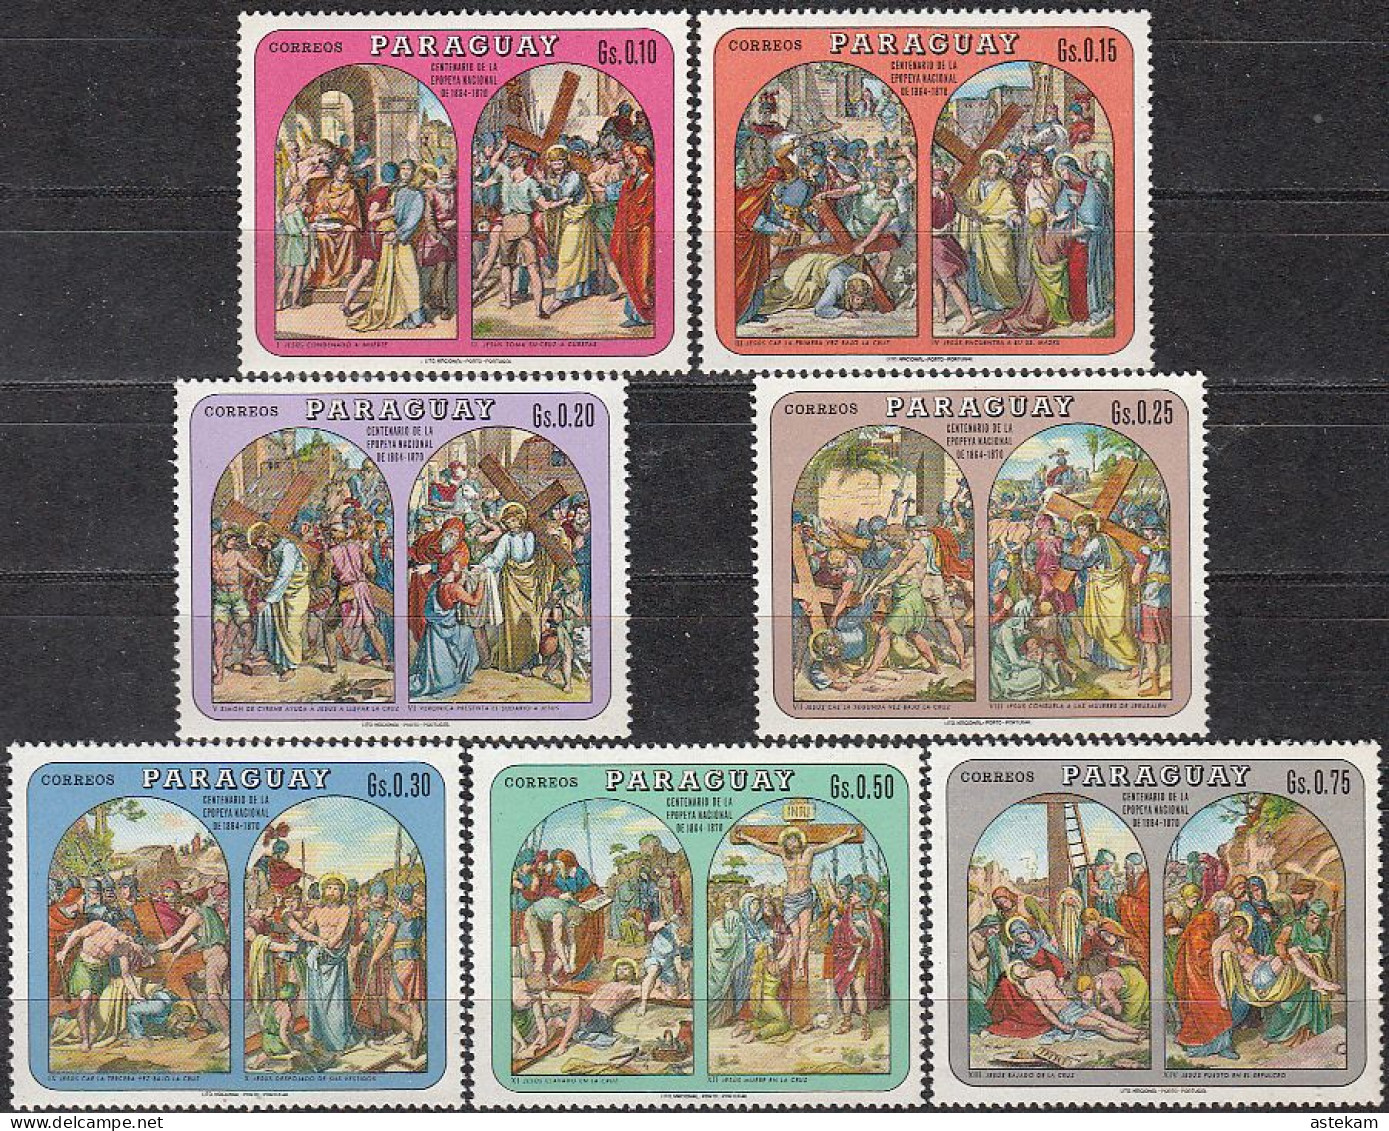 PARAGUAY 1970, EASTER, INCOMPLETE USED SERIES With GOOD QUALITY - Paraguay